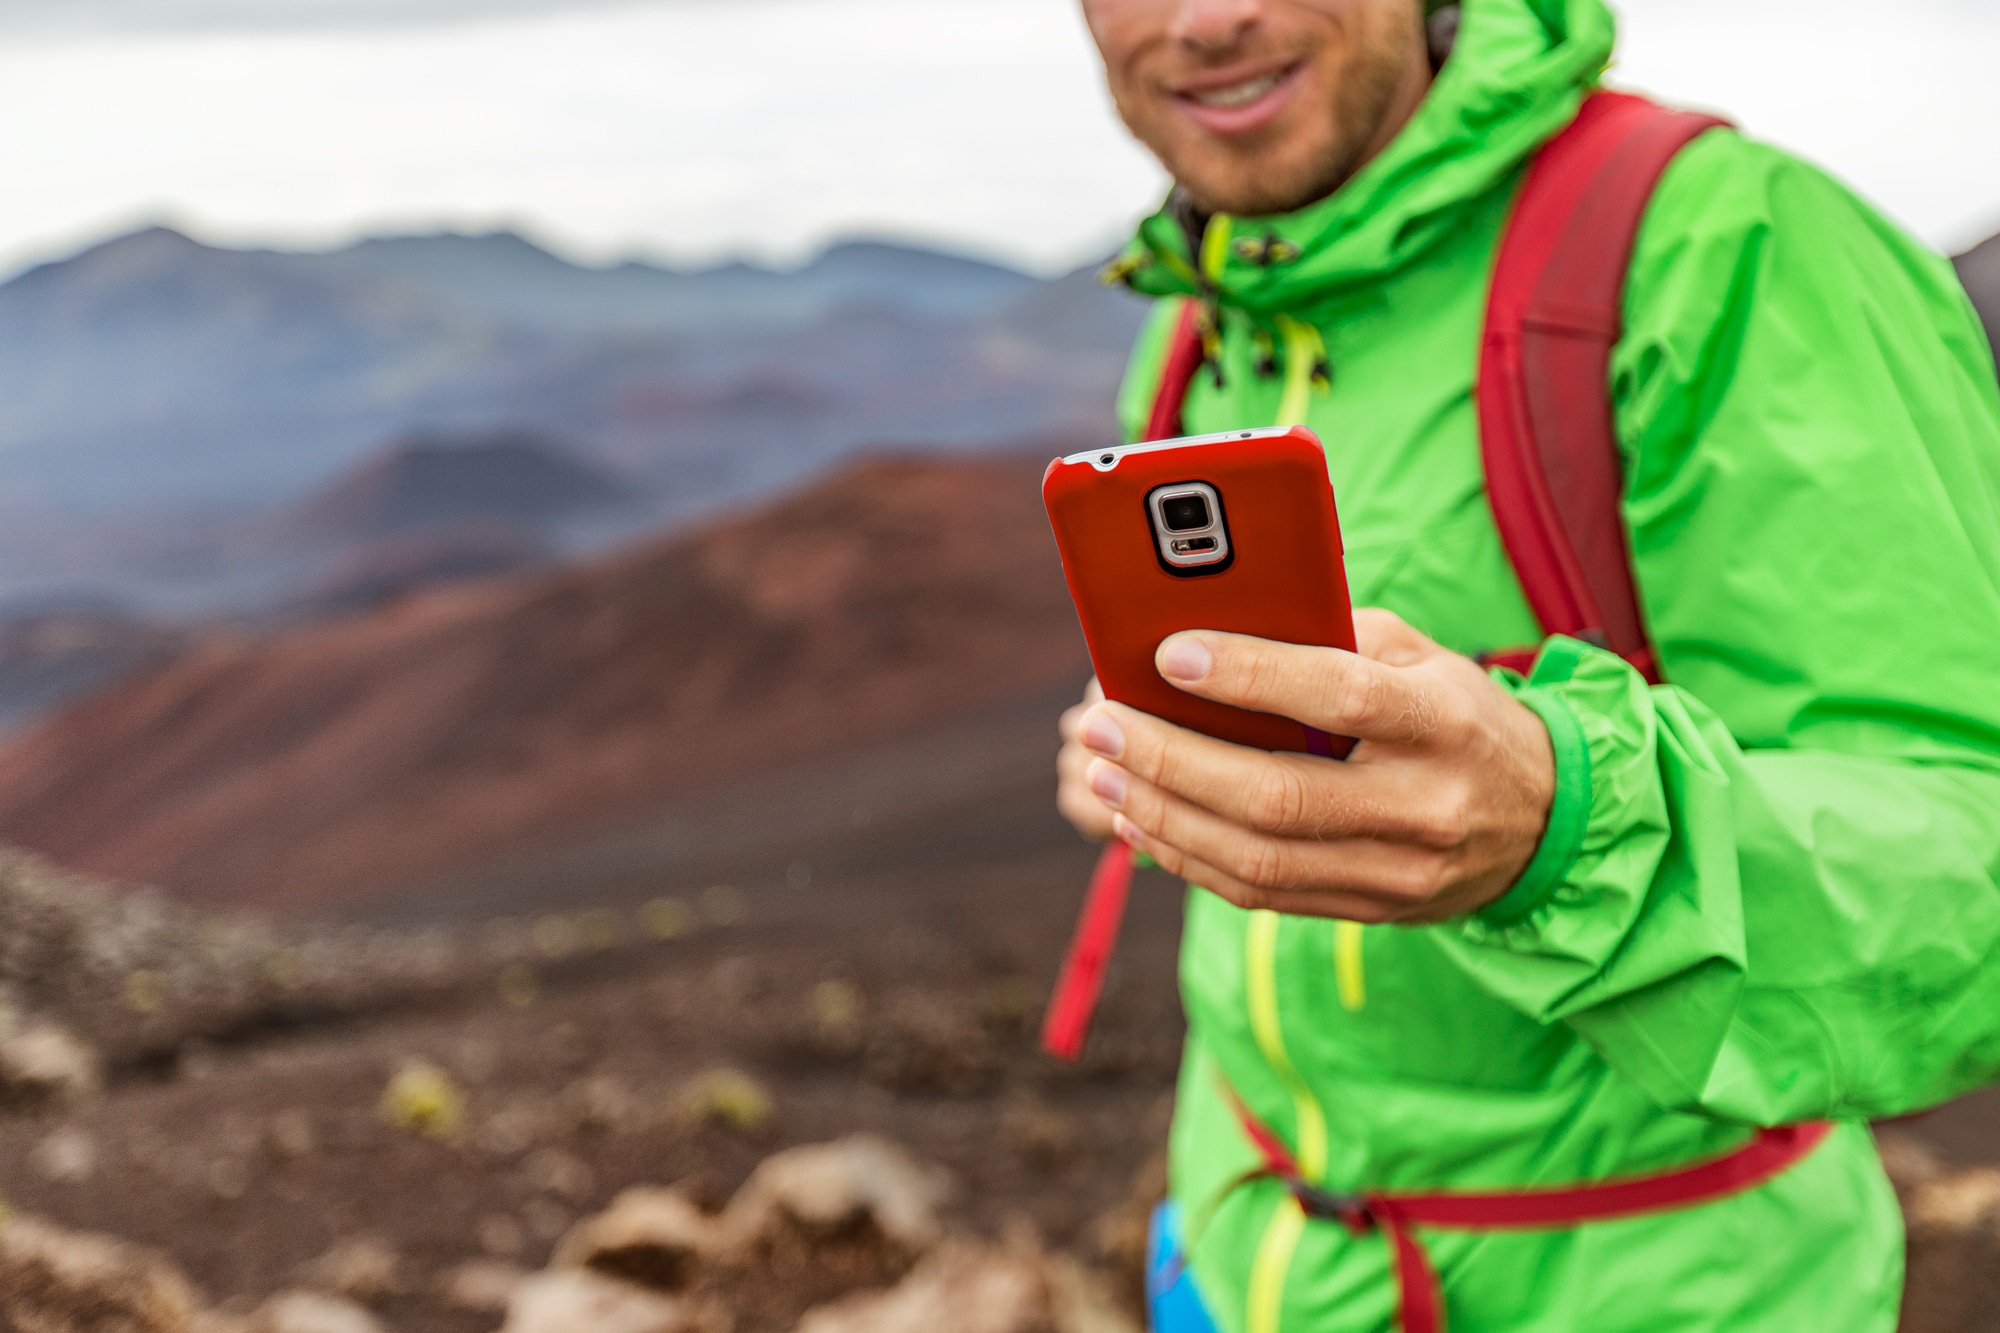 Lifeproof Fre Power Case Review: Pros and Cons for Your Phone